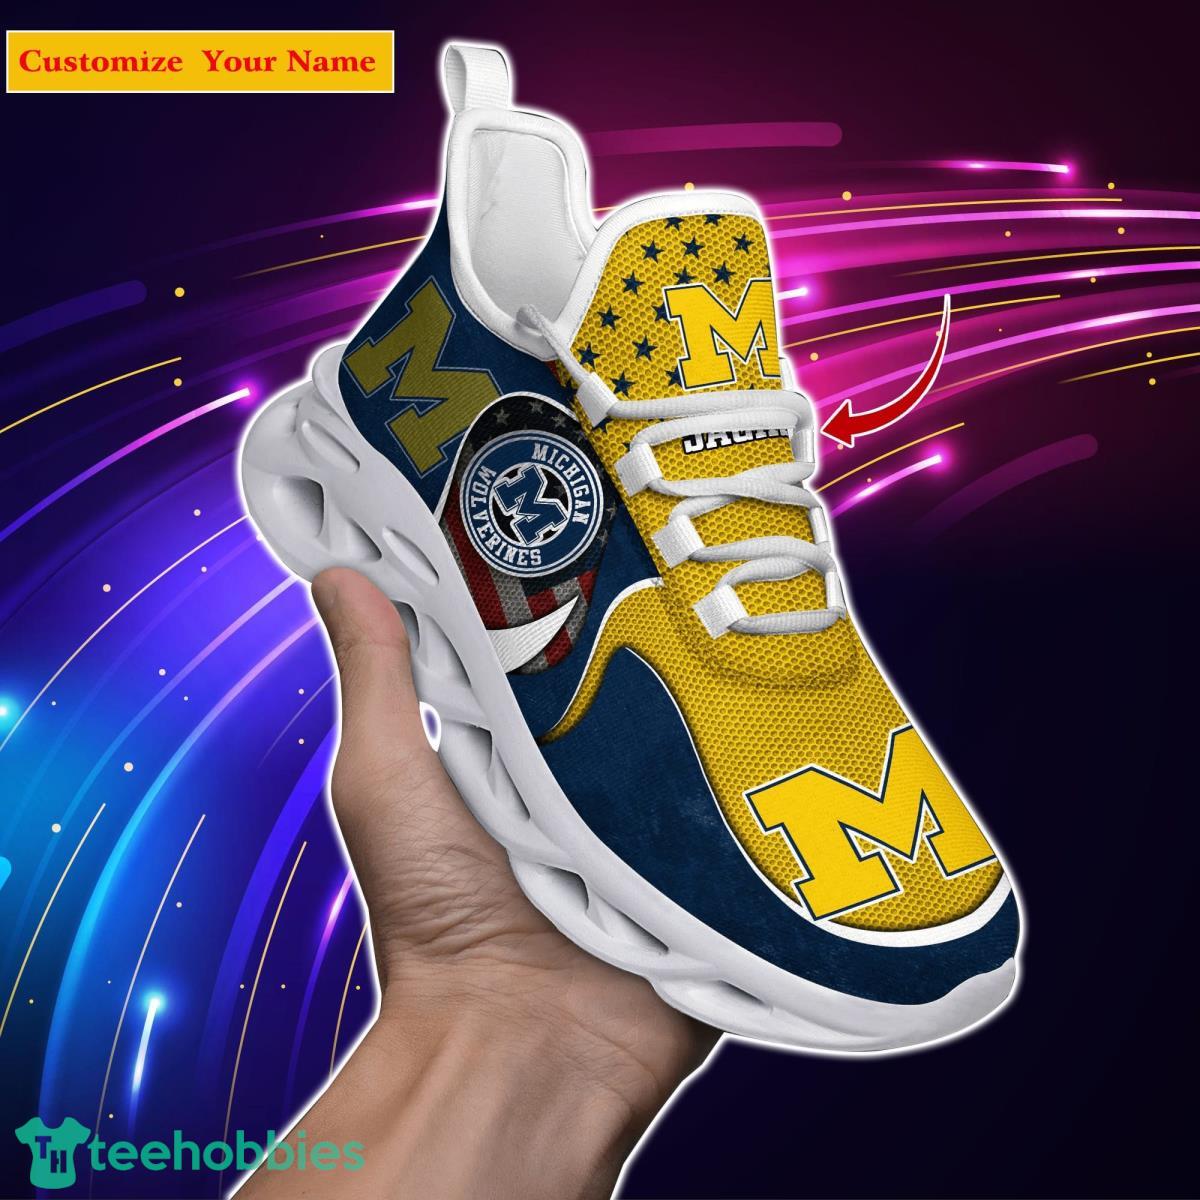 Michigan Wolverines NCAA2 Custom Name Max Soul Shoes Special Gift For Men Women Fans Product Photo 1